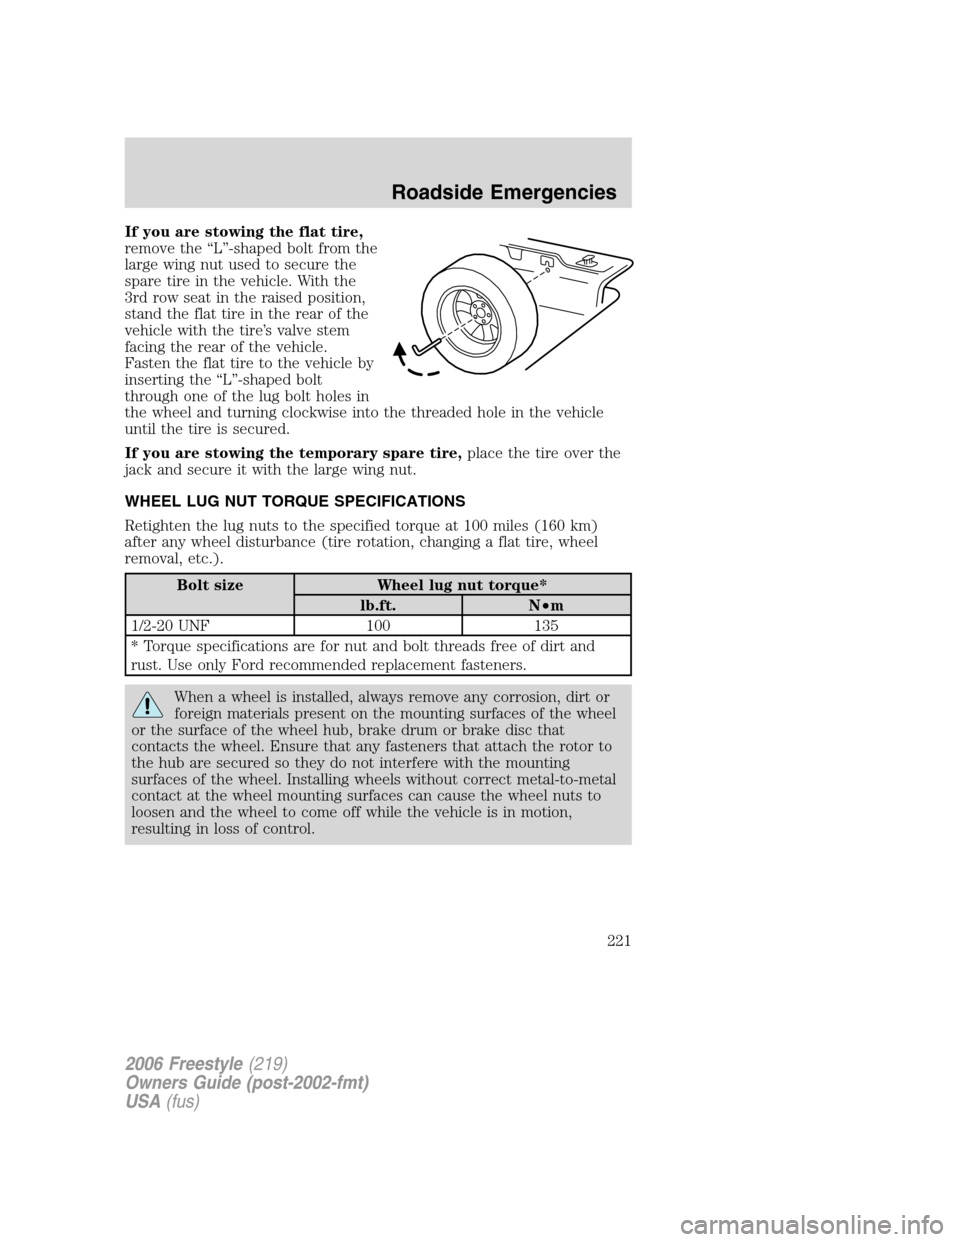 FORD FREESTYLE 2006 1.G User Guide If you are stowing the flat tire,
remove the “L”-shaped bolt from the
large wing nut used to secure the
spare tire in the vehicle. With the
3rd row seat in the raised position,
stand the flat tire